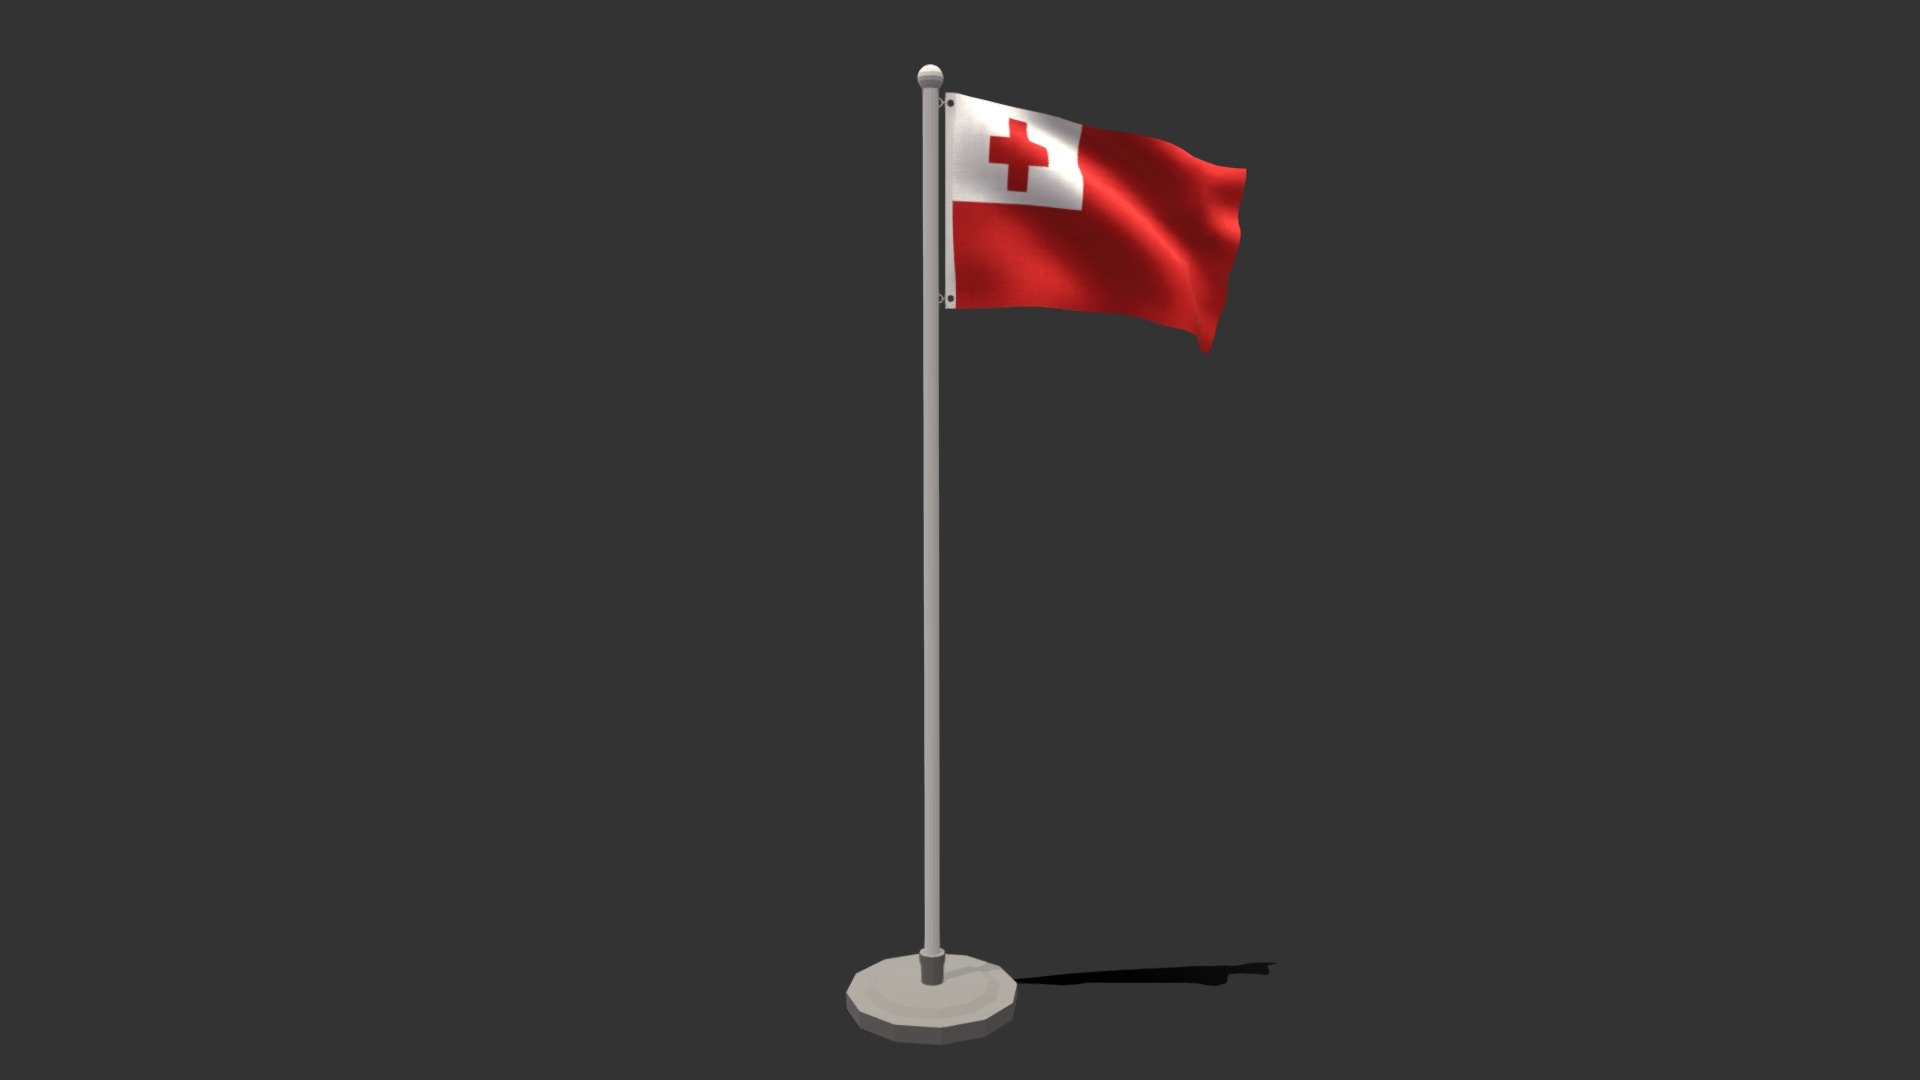 This is a low poly 3D model of an animated flag of Tonga. The low poly flag was modeled and prepared for low-poly style renderings, background, general CG visualization presented as 2 meshes with quads only.

Verts : 1.416 Faces : 1.343.

1024x1024 textures included. Diffuse, roughness and normal maps available only for flag. The pole have simple materials with colors.

The animation is based on shapekeys, 248 frames and seamless, no rig included.

The original file was created in blender. You will receive a OBJ, FBX, blend, DAE, Stl, gLTF, abc.

****PLEASE NOTE Animation icluded only in blend, FBX, abc and glTF files.

Warning: Depending on which software package you are using, the exchange formats (.obj , .dae, .fbx) may not match the preview images exactly. Due to the nature of these formats, there may be some textures that have to be loaded by hand and possibly triangulated geometry 3d model